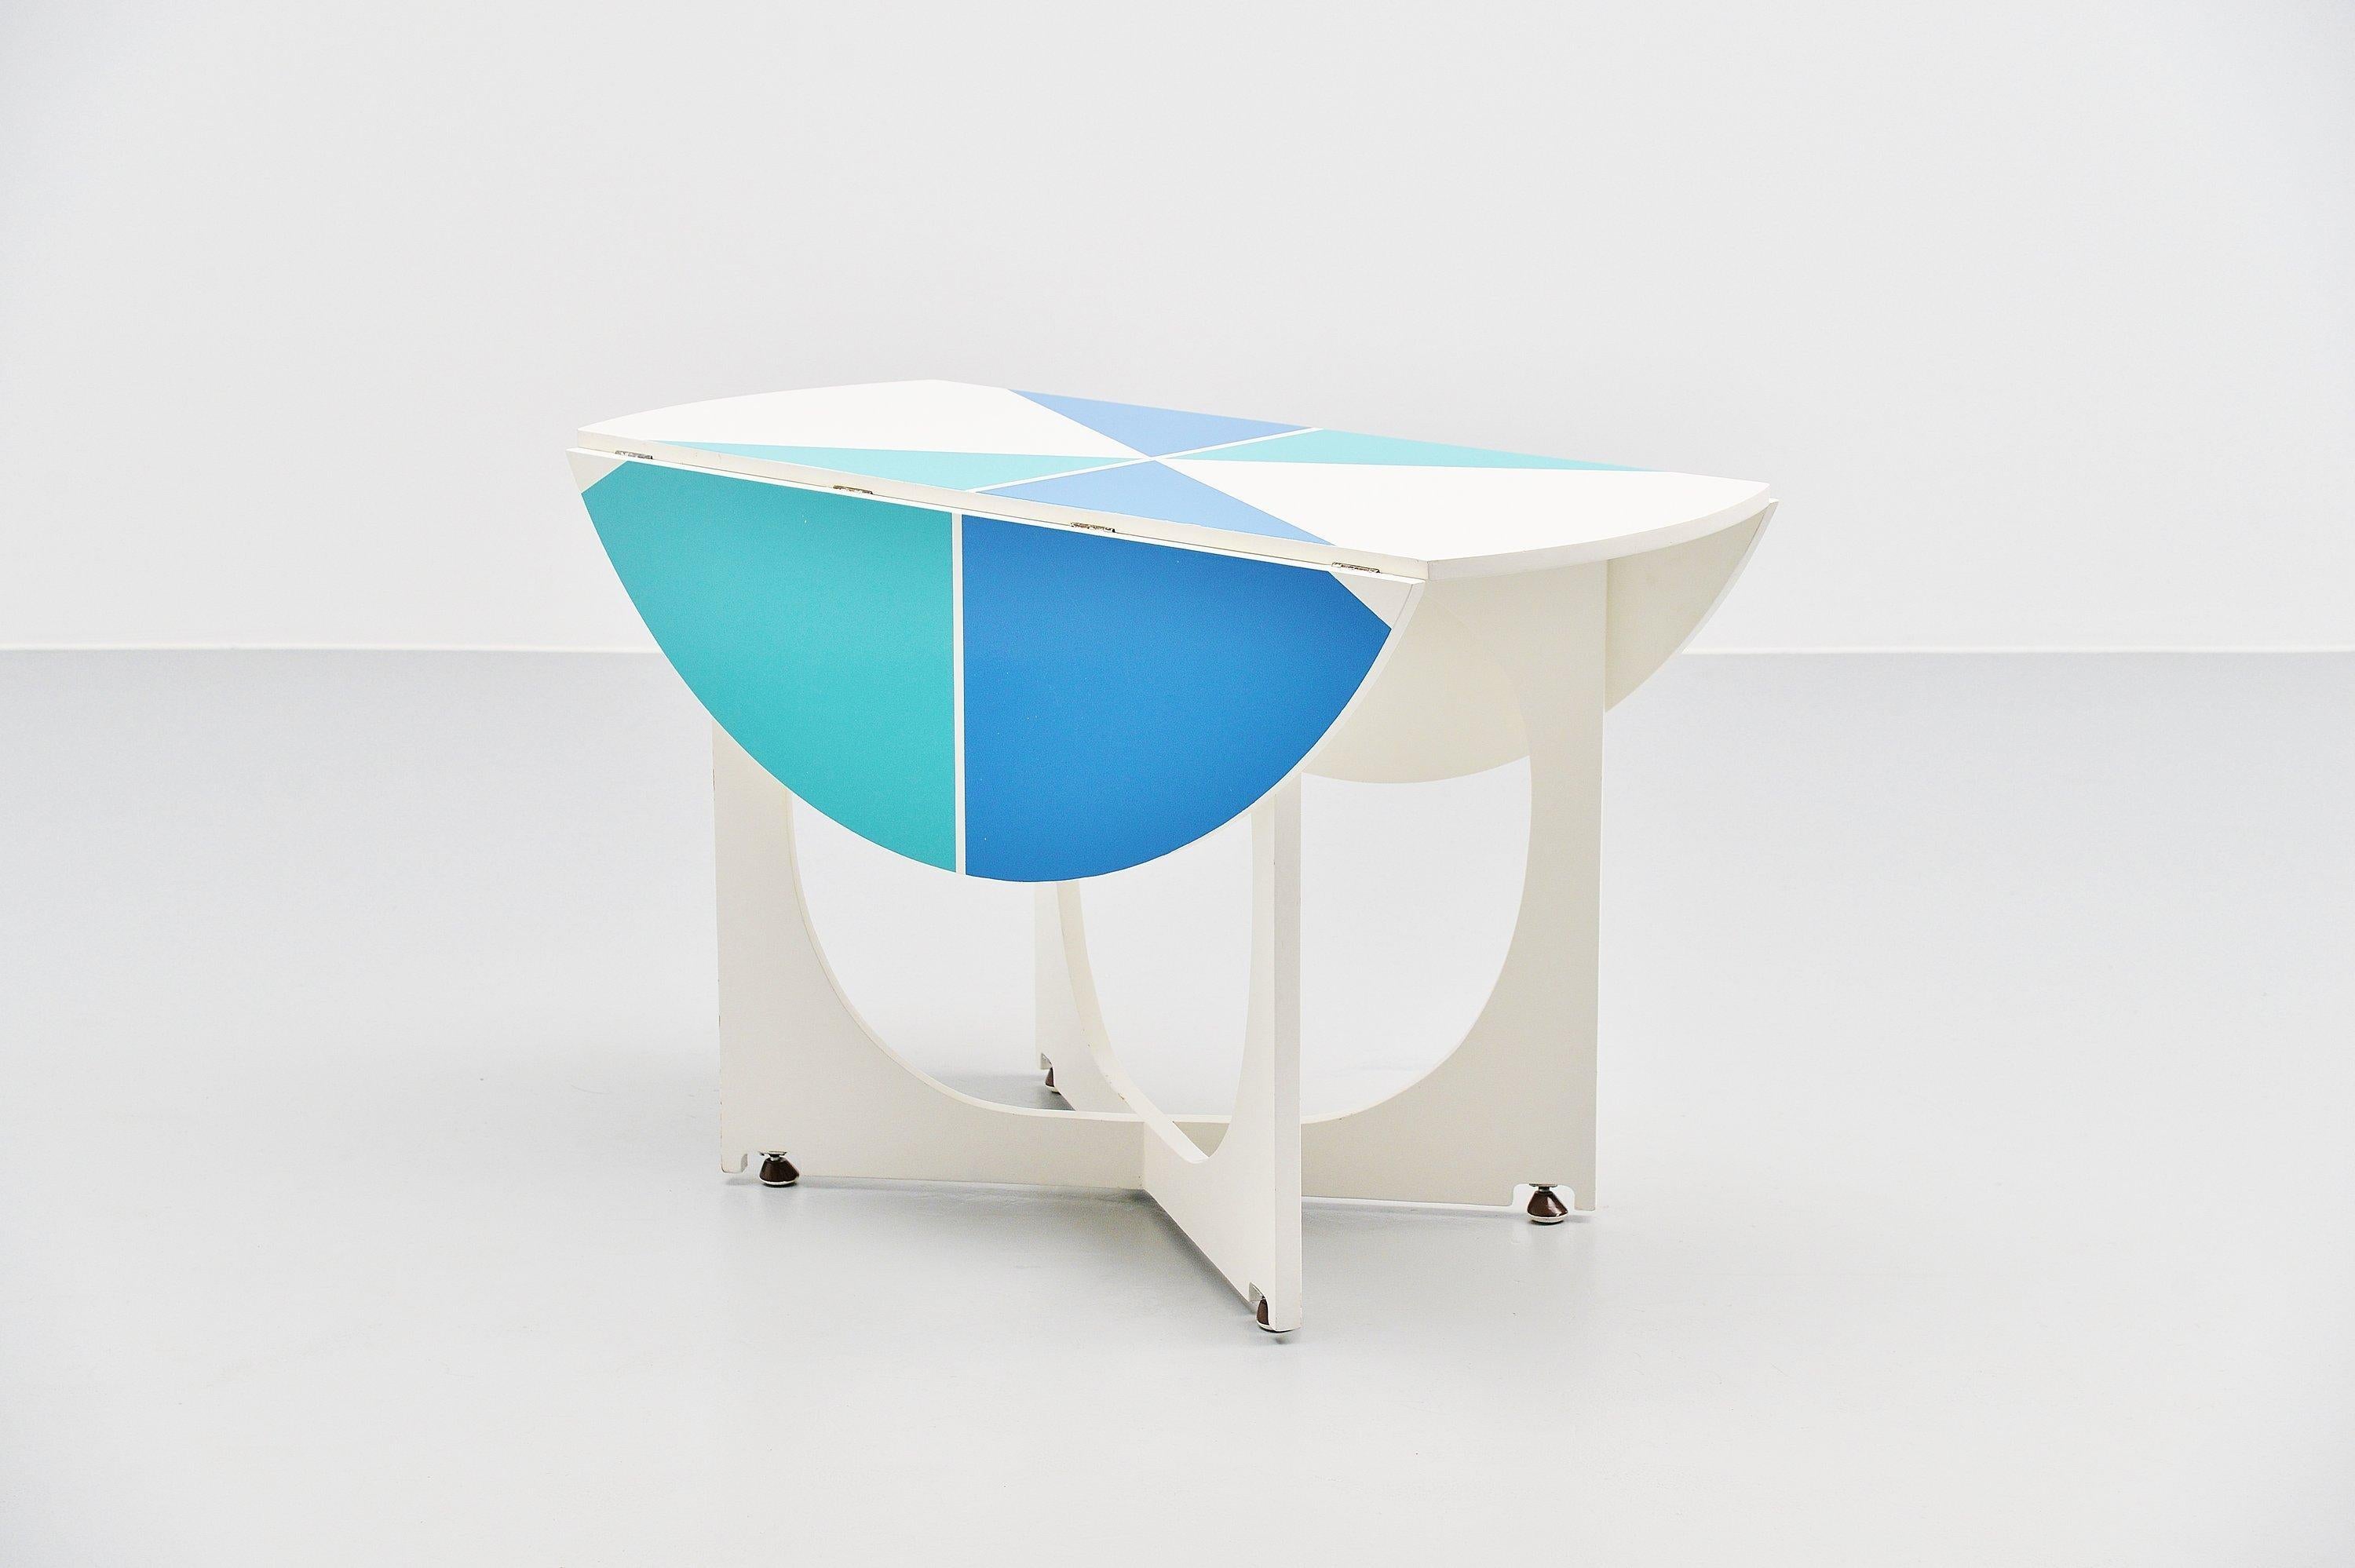 Super rare drop leave table from the Apta series designed by Gio Ponti and manufactured by Walter Ponti, Italy, 1970. This table is made of plywood structure, white painted and the top has a geometrical pattern in light and dark blue. The table is